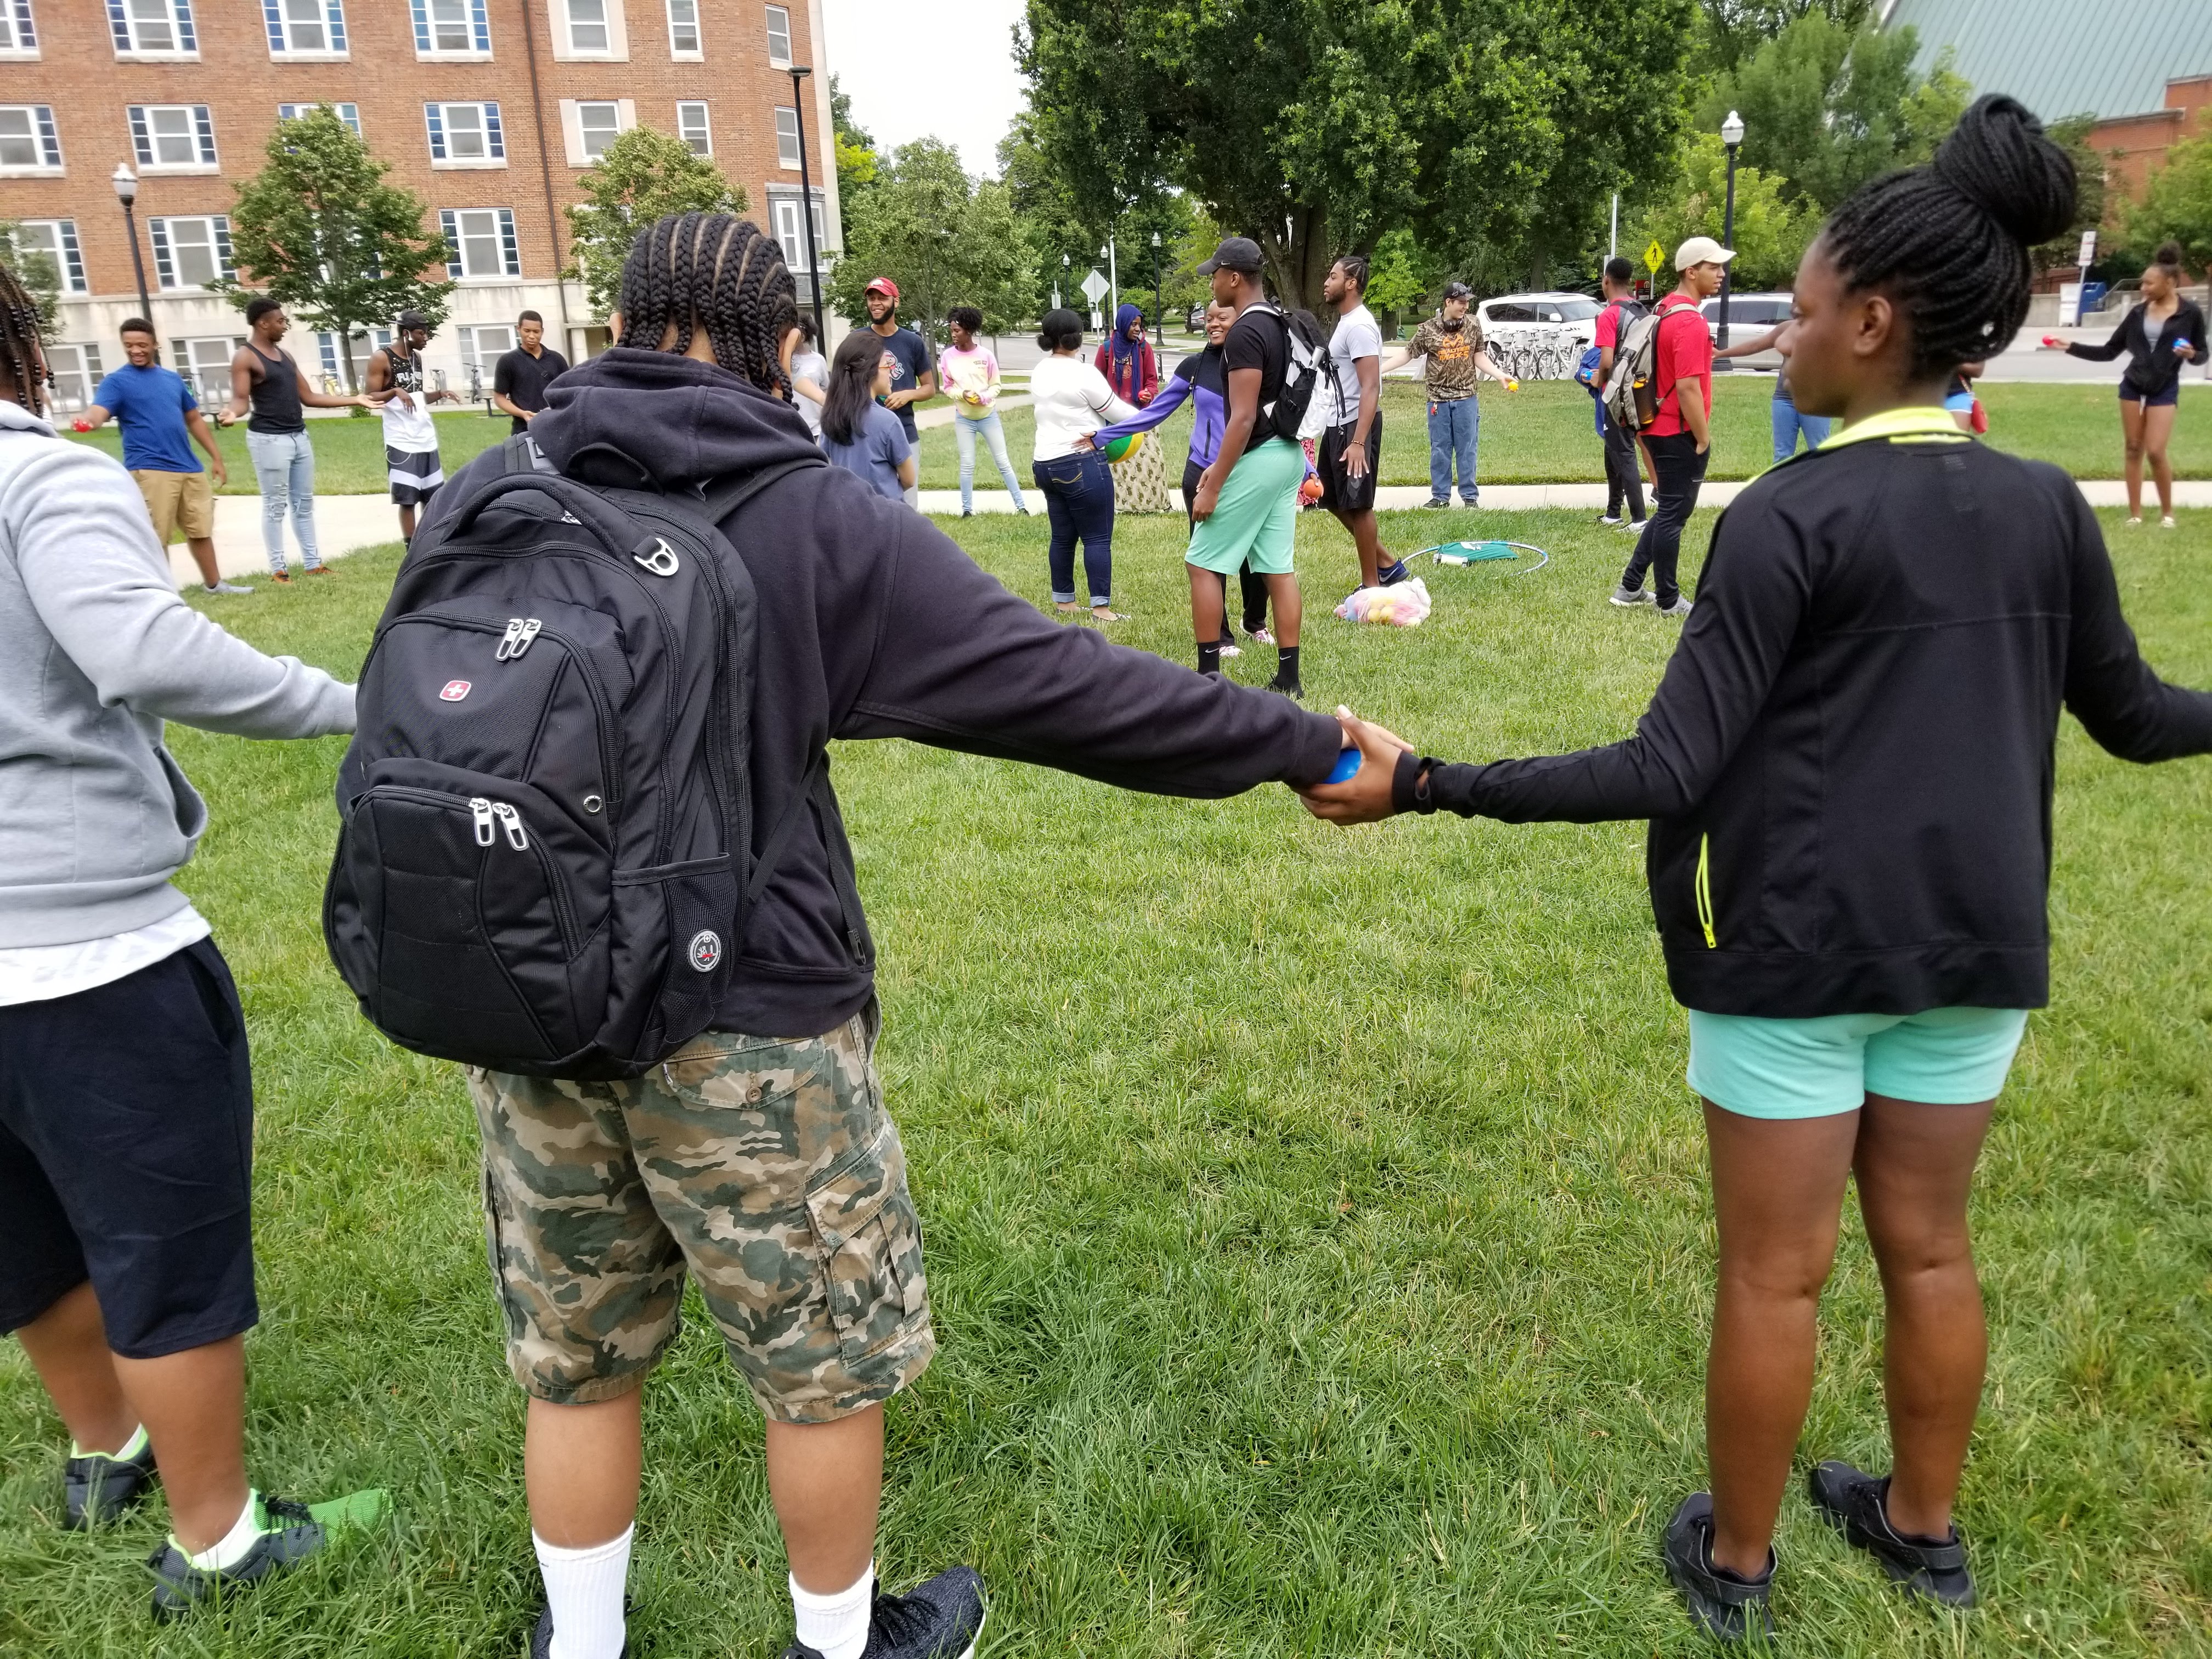 Group of UB scholar stand in a circle and hold hands